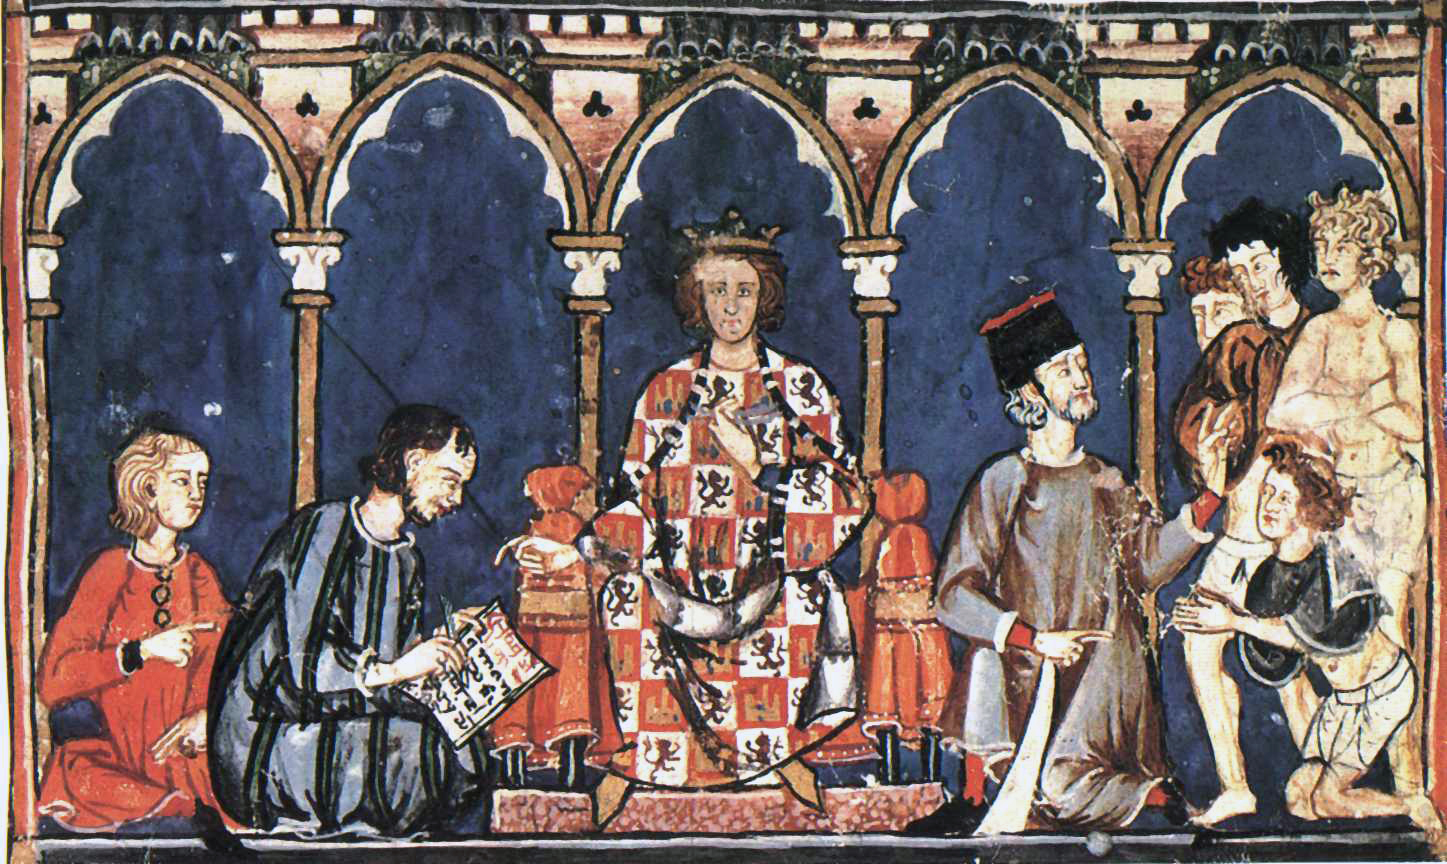 800 Years of Alfonso X - King Alfonso and the Path of the Planets